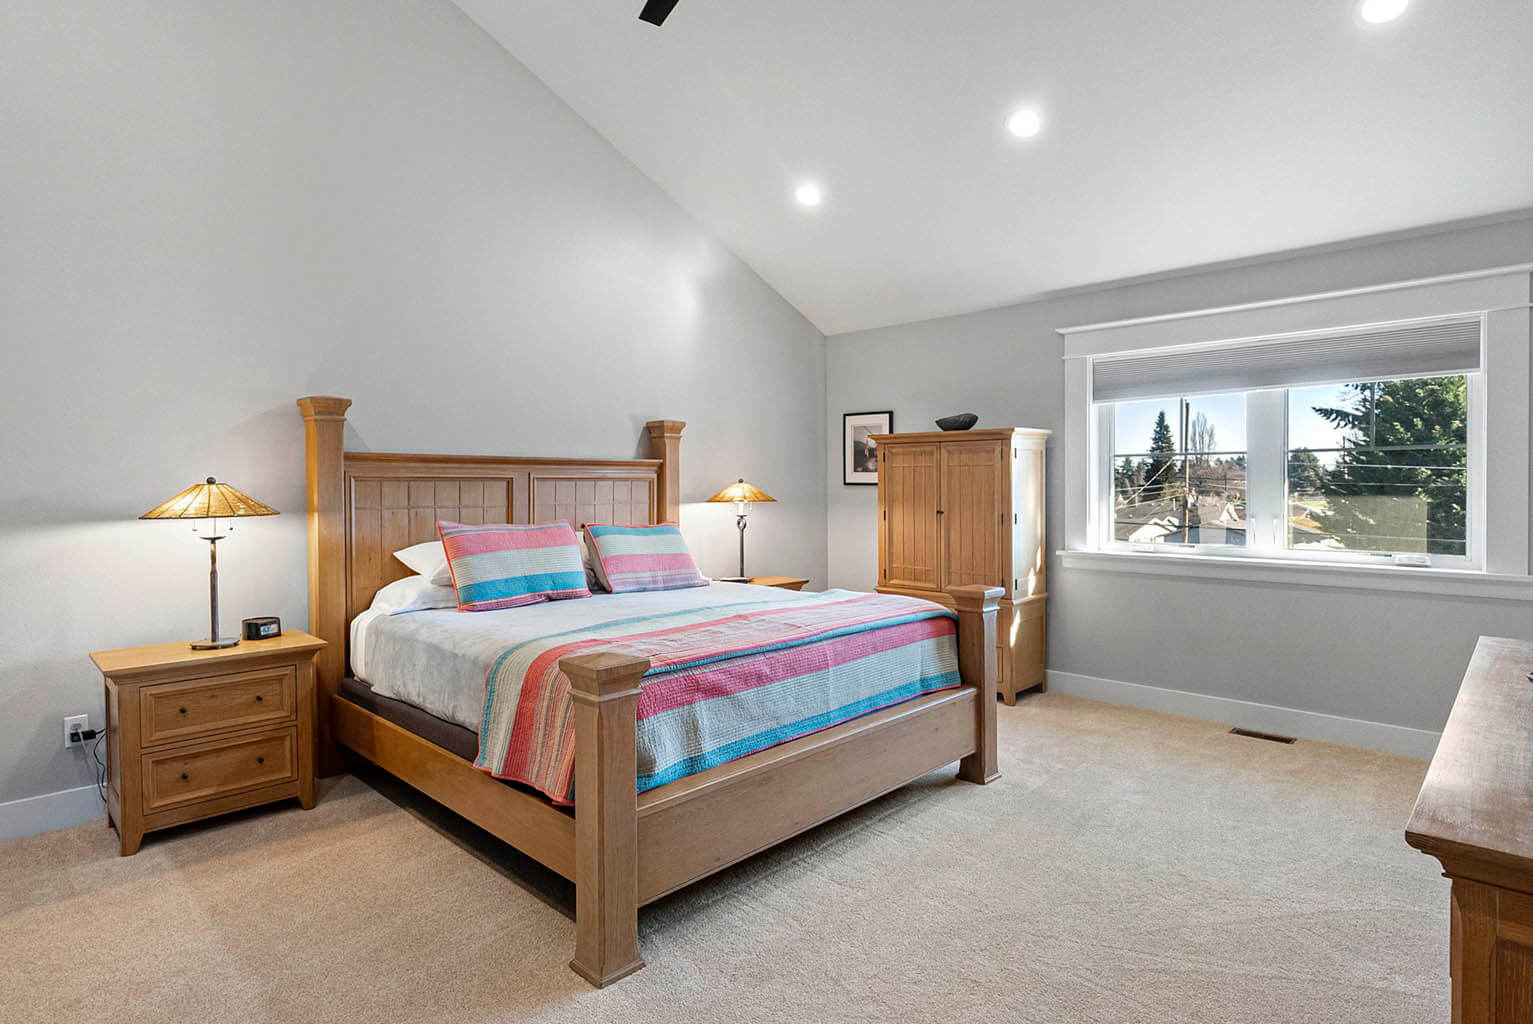 Spacious primary bedroom with vaulted ceiling